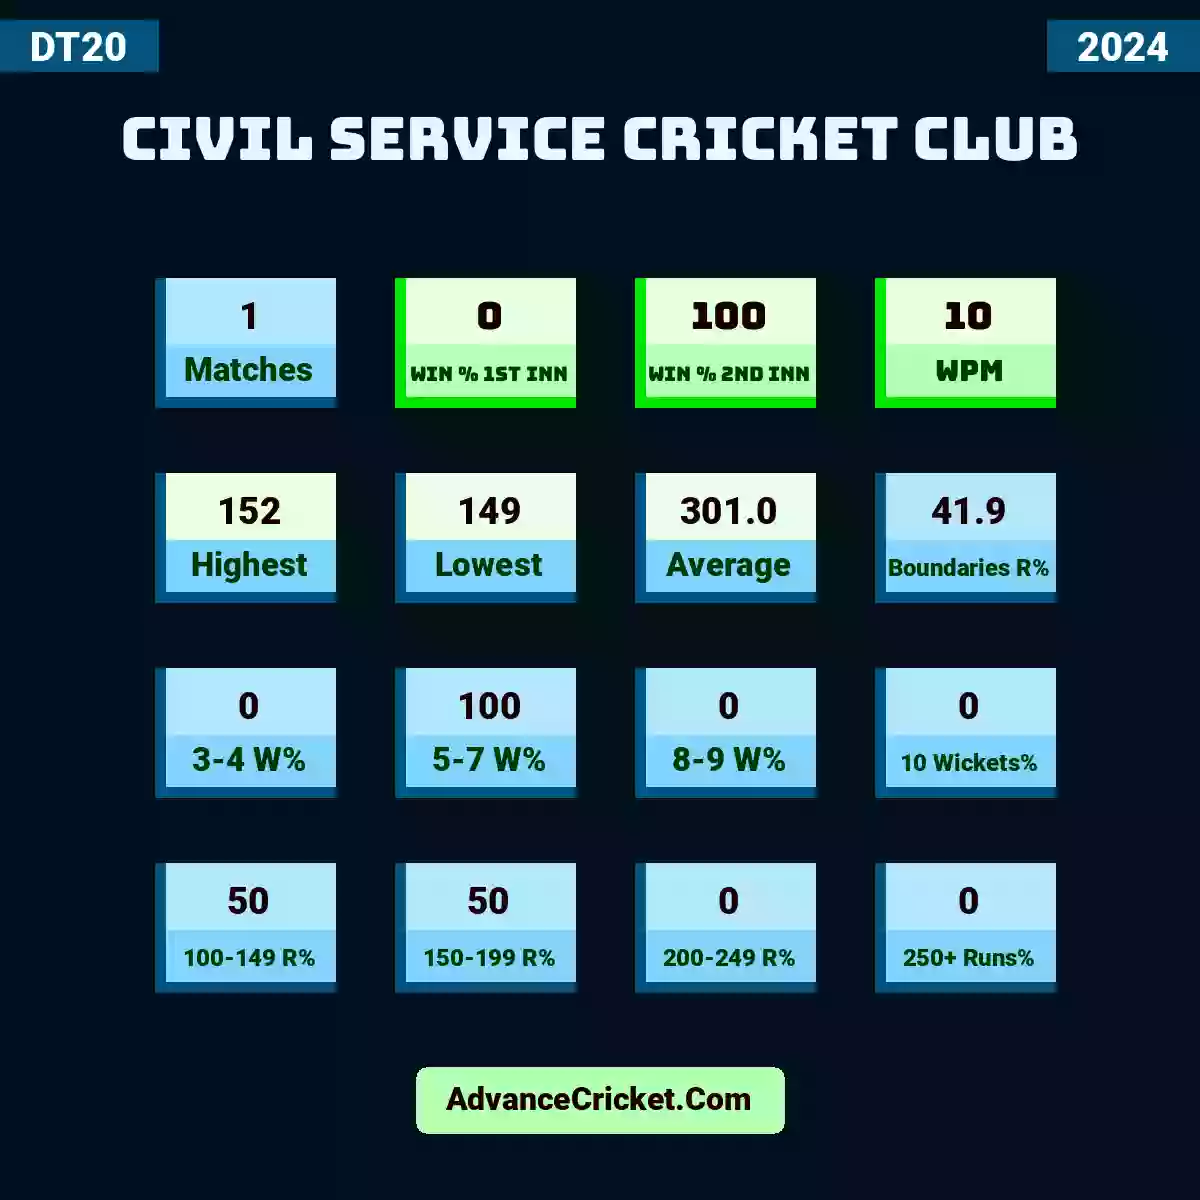 Image showing Civil Service Cricket Club DT20 2024 with Matches: 1, Win % 1st Inn: 0, Win % 2nd Inn: 100, WPM: 10, Highest: 152, Lowest: 149, Average: 301.0, Boundaries R%: 41.9, 3-4 W%: 0, 5-7 W%: 100, 8-9 W%: 0, 10 Wickets%: 0, 100-149 R%: 50, 150-199 R%: 50, 200-249 R%: 0, 250+ Runs%: 0.